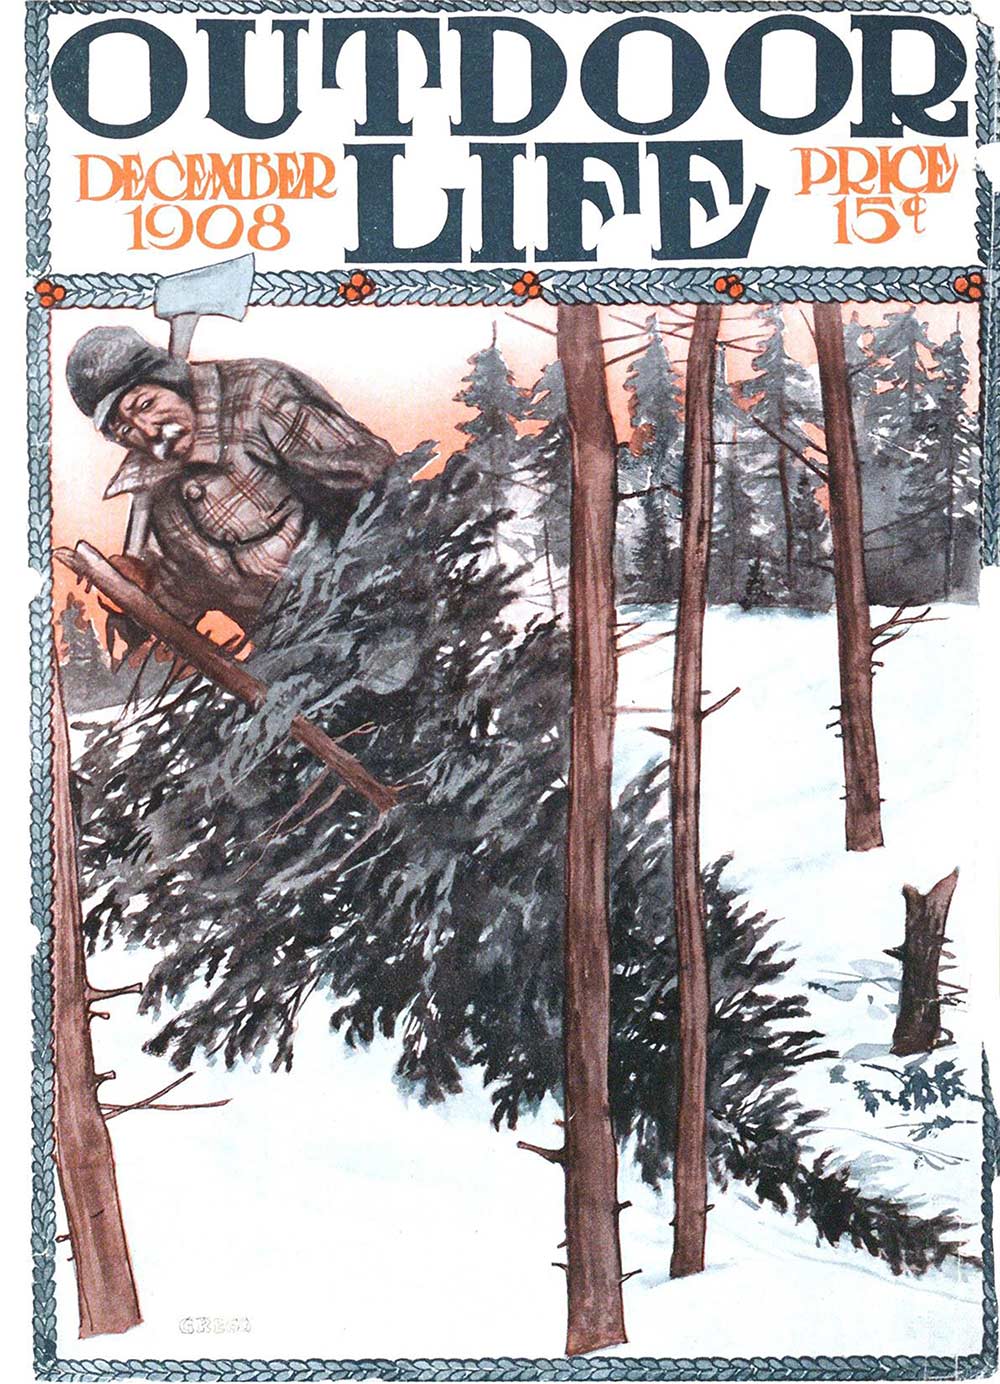 December 1908 Cover of Outdoor Life